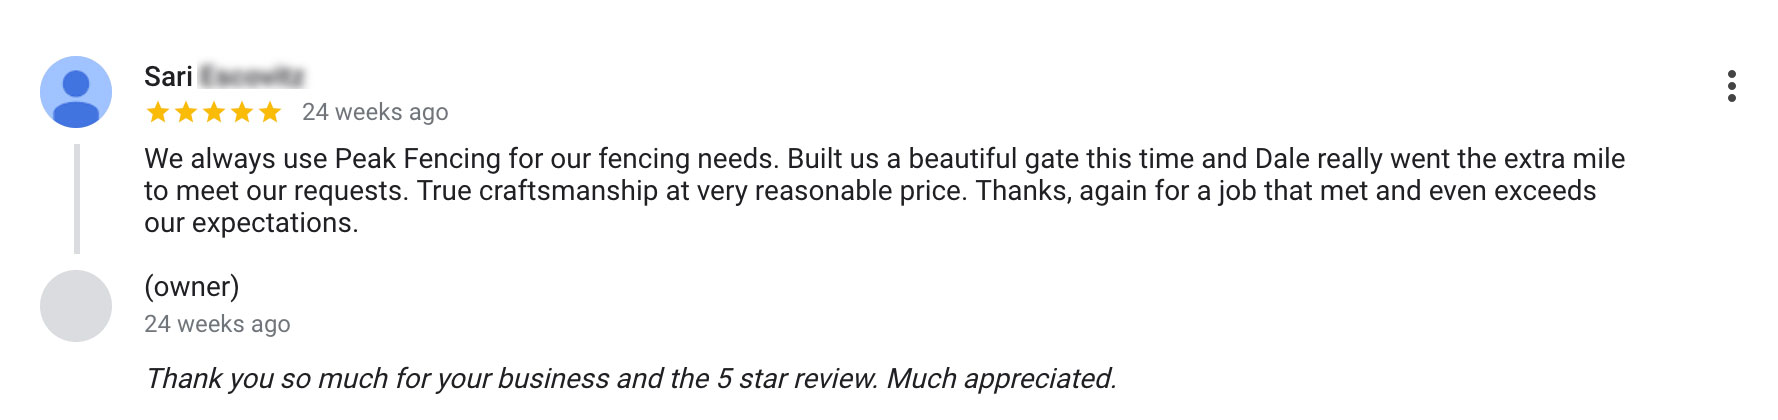 5 star review from sari